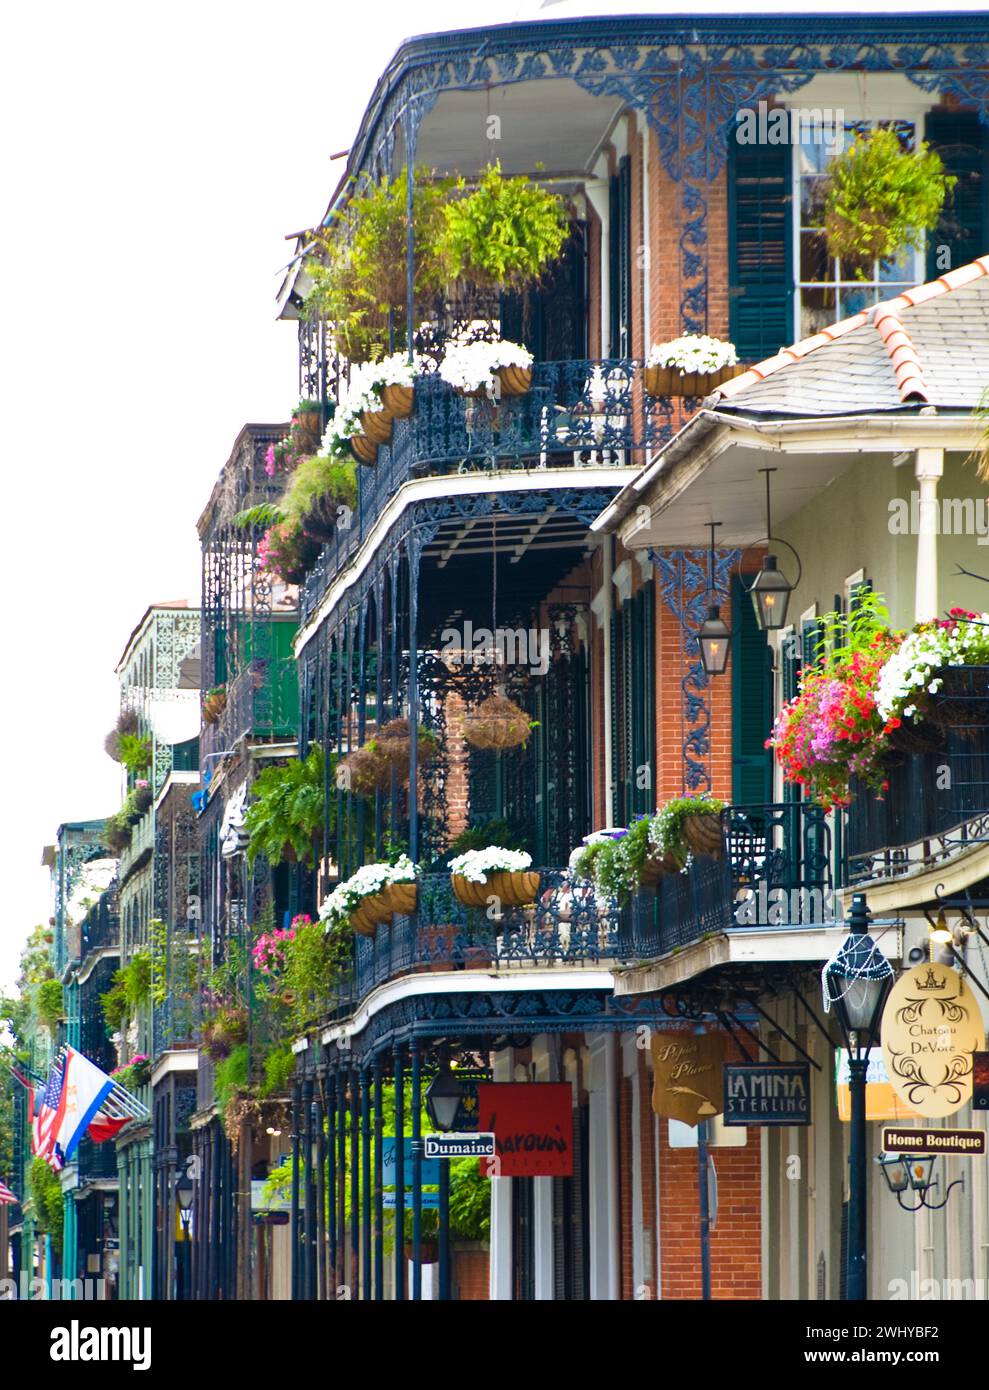 ornate iron grill work on French Quarter buildings in New Orleans, Louisiana - USA Stock Photo